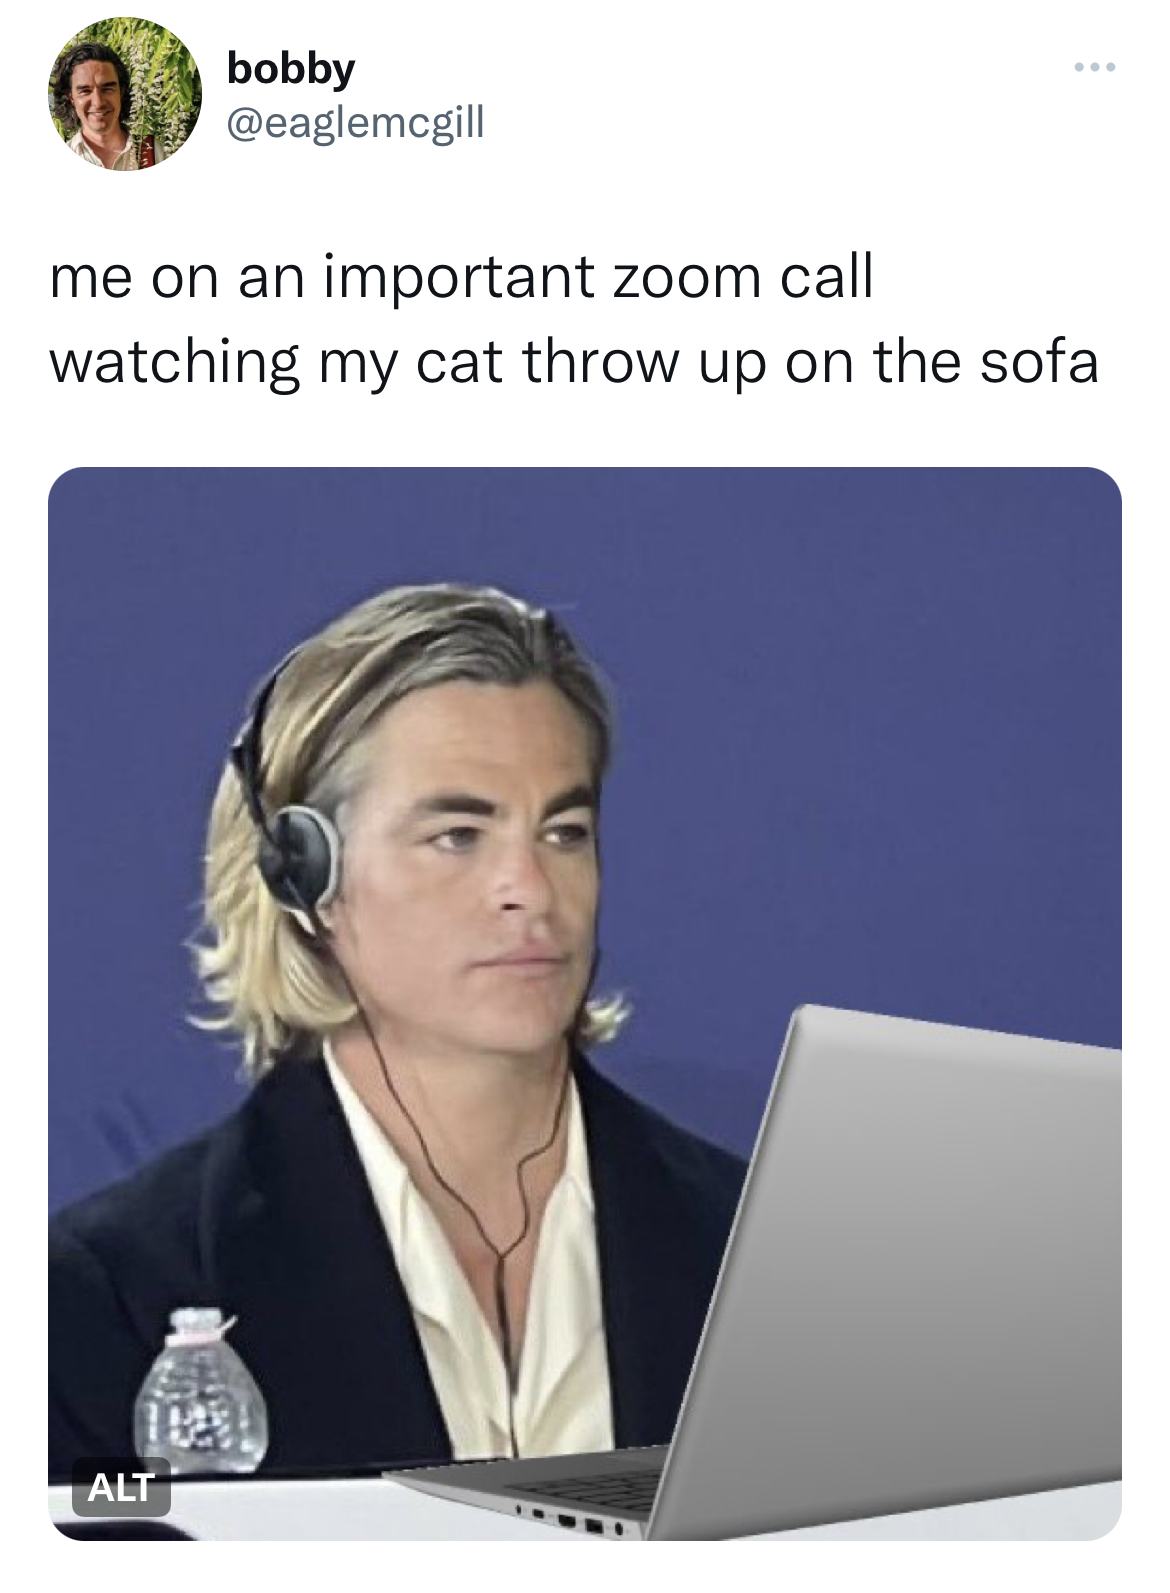 Fresh and funny tweets - Chris Pine - bobby Alt www me on an important zoom call watching my cat throw up on the sofa